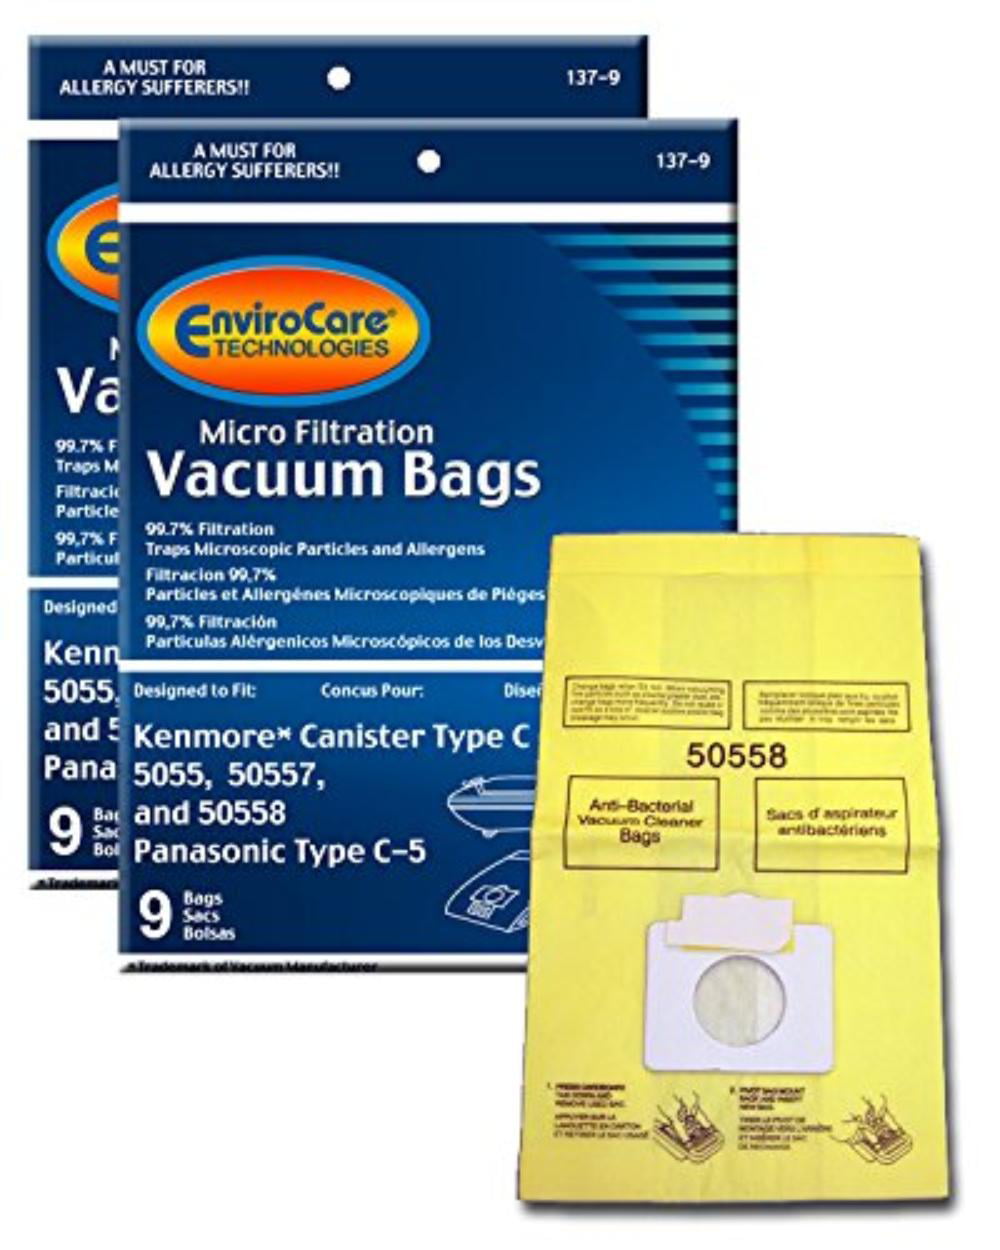 50557 and Panasonic Type C-5 6 pack 50558 Envirocare Replacement Allergen Vacuum Bags for Kenmore Canister Type C and Q 50555